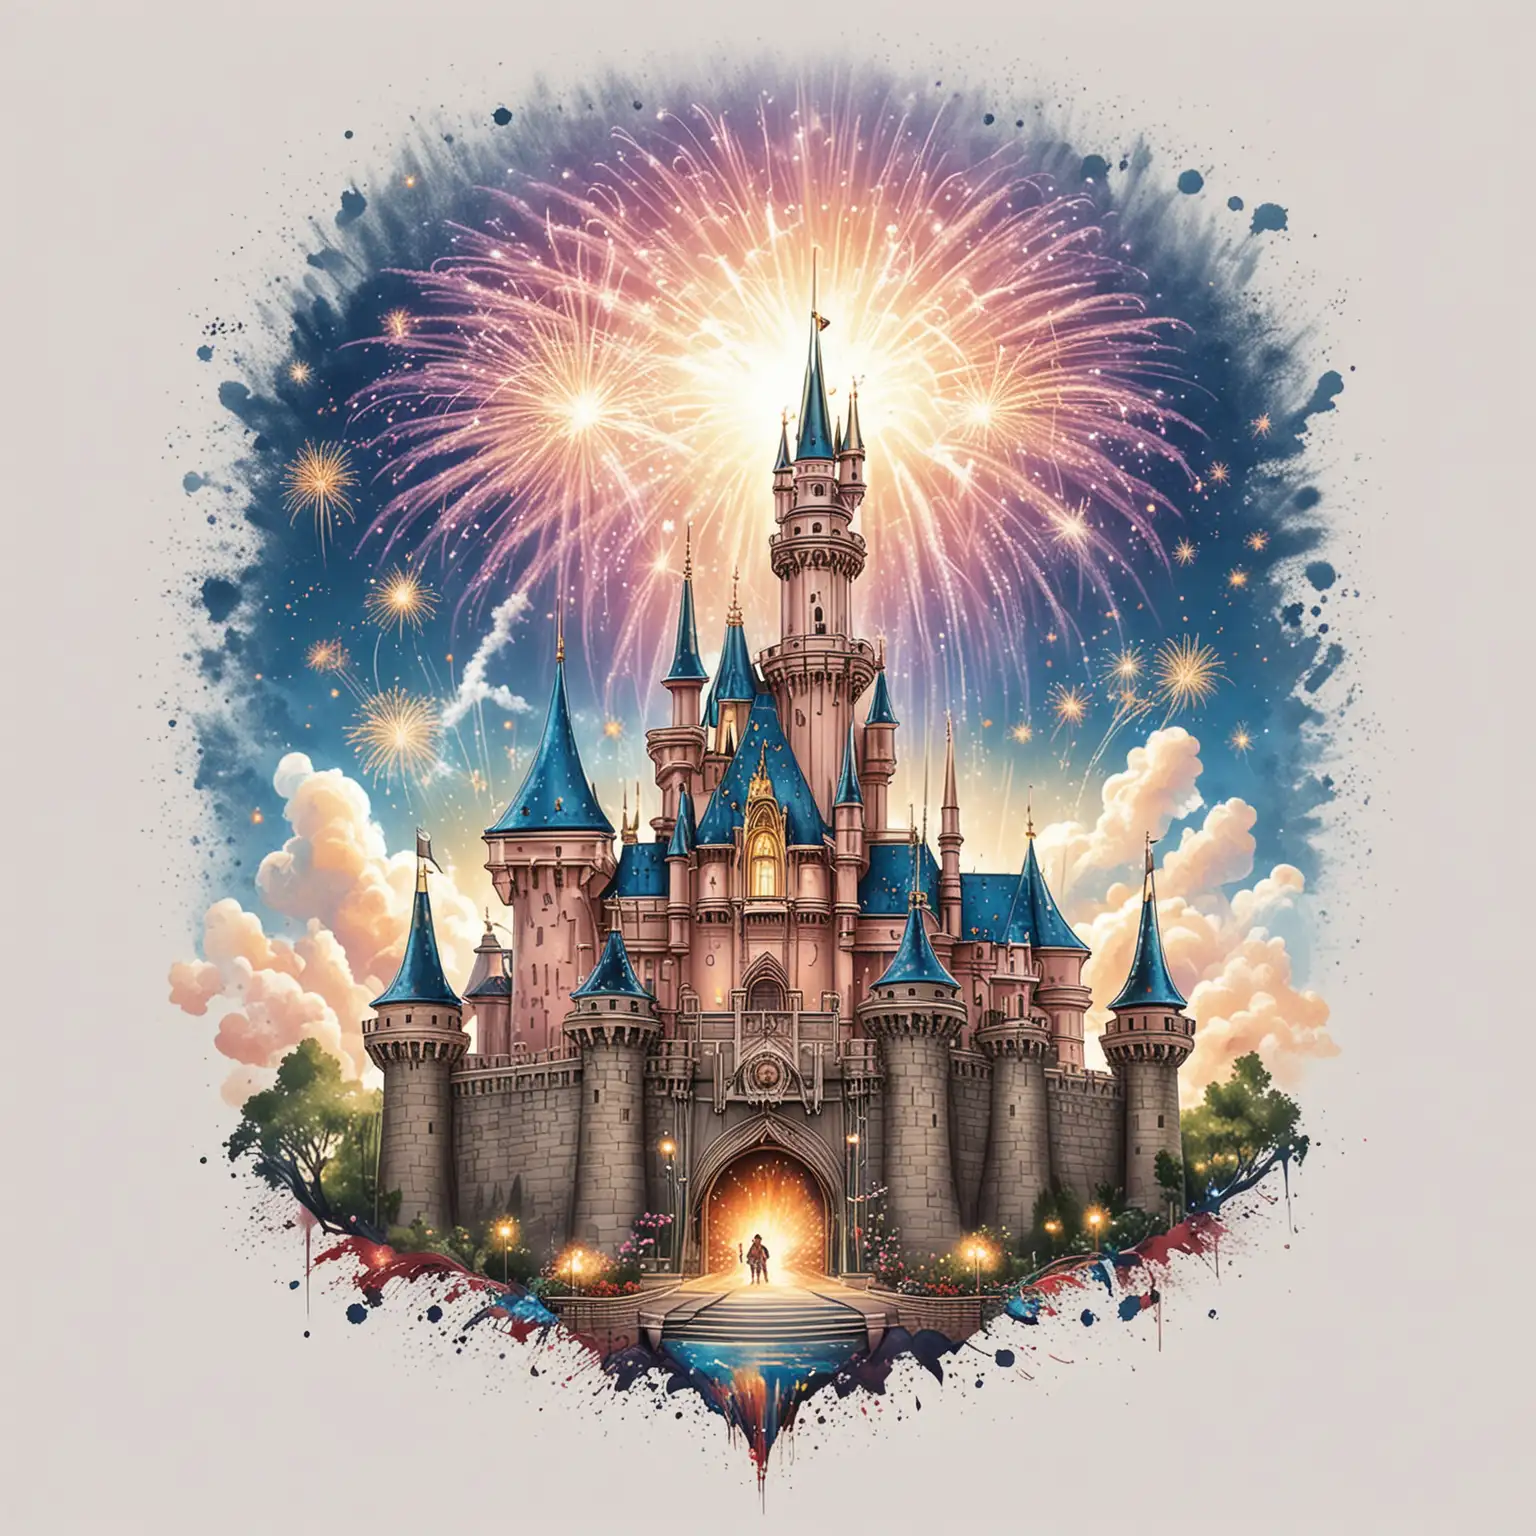 Design a t-shirt transfer, Illustration of Sleeping Beauty Castle at Disneyland Anaheim, large fireworks explosions, white background